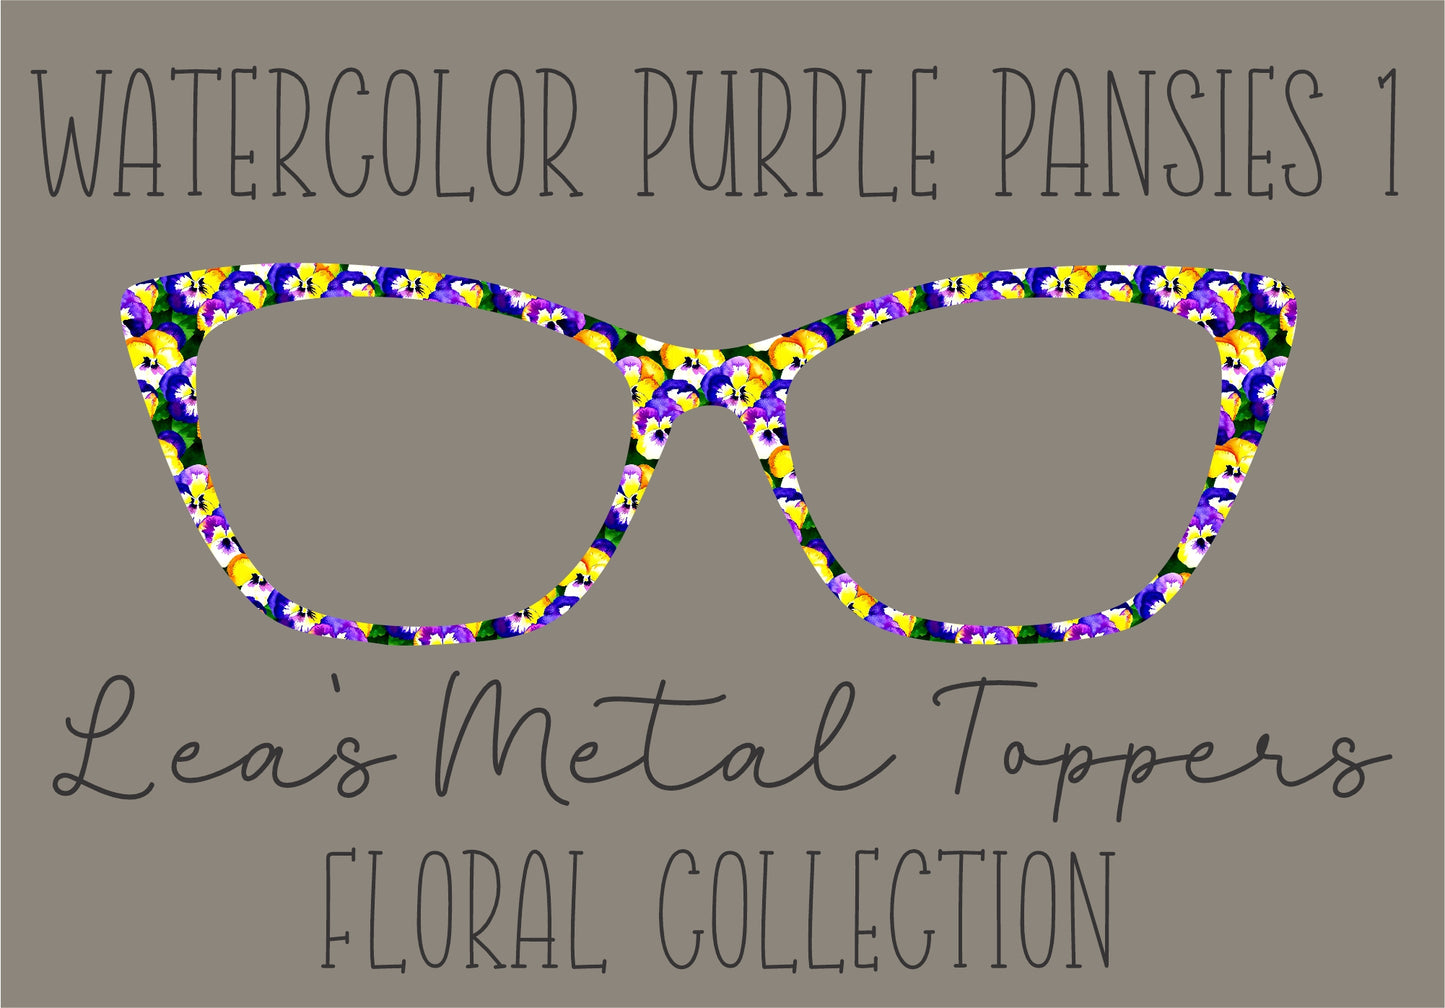 WATERCOLOR PURPLE PANSIES 1 Eyewear Frame Toppers COMES WITH MAGNETS